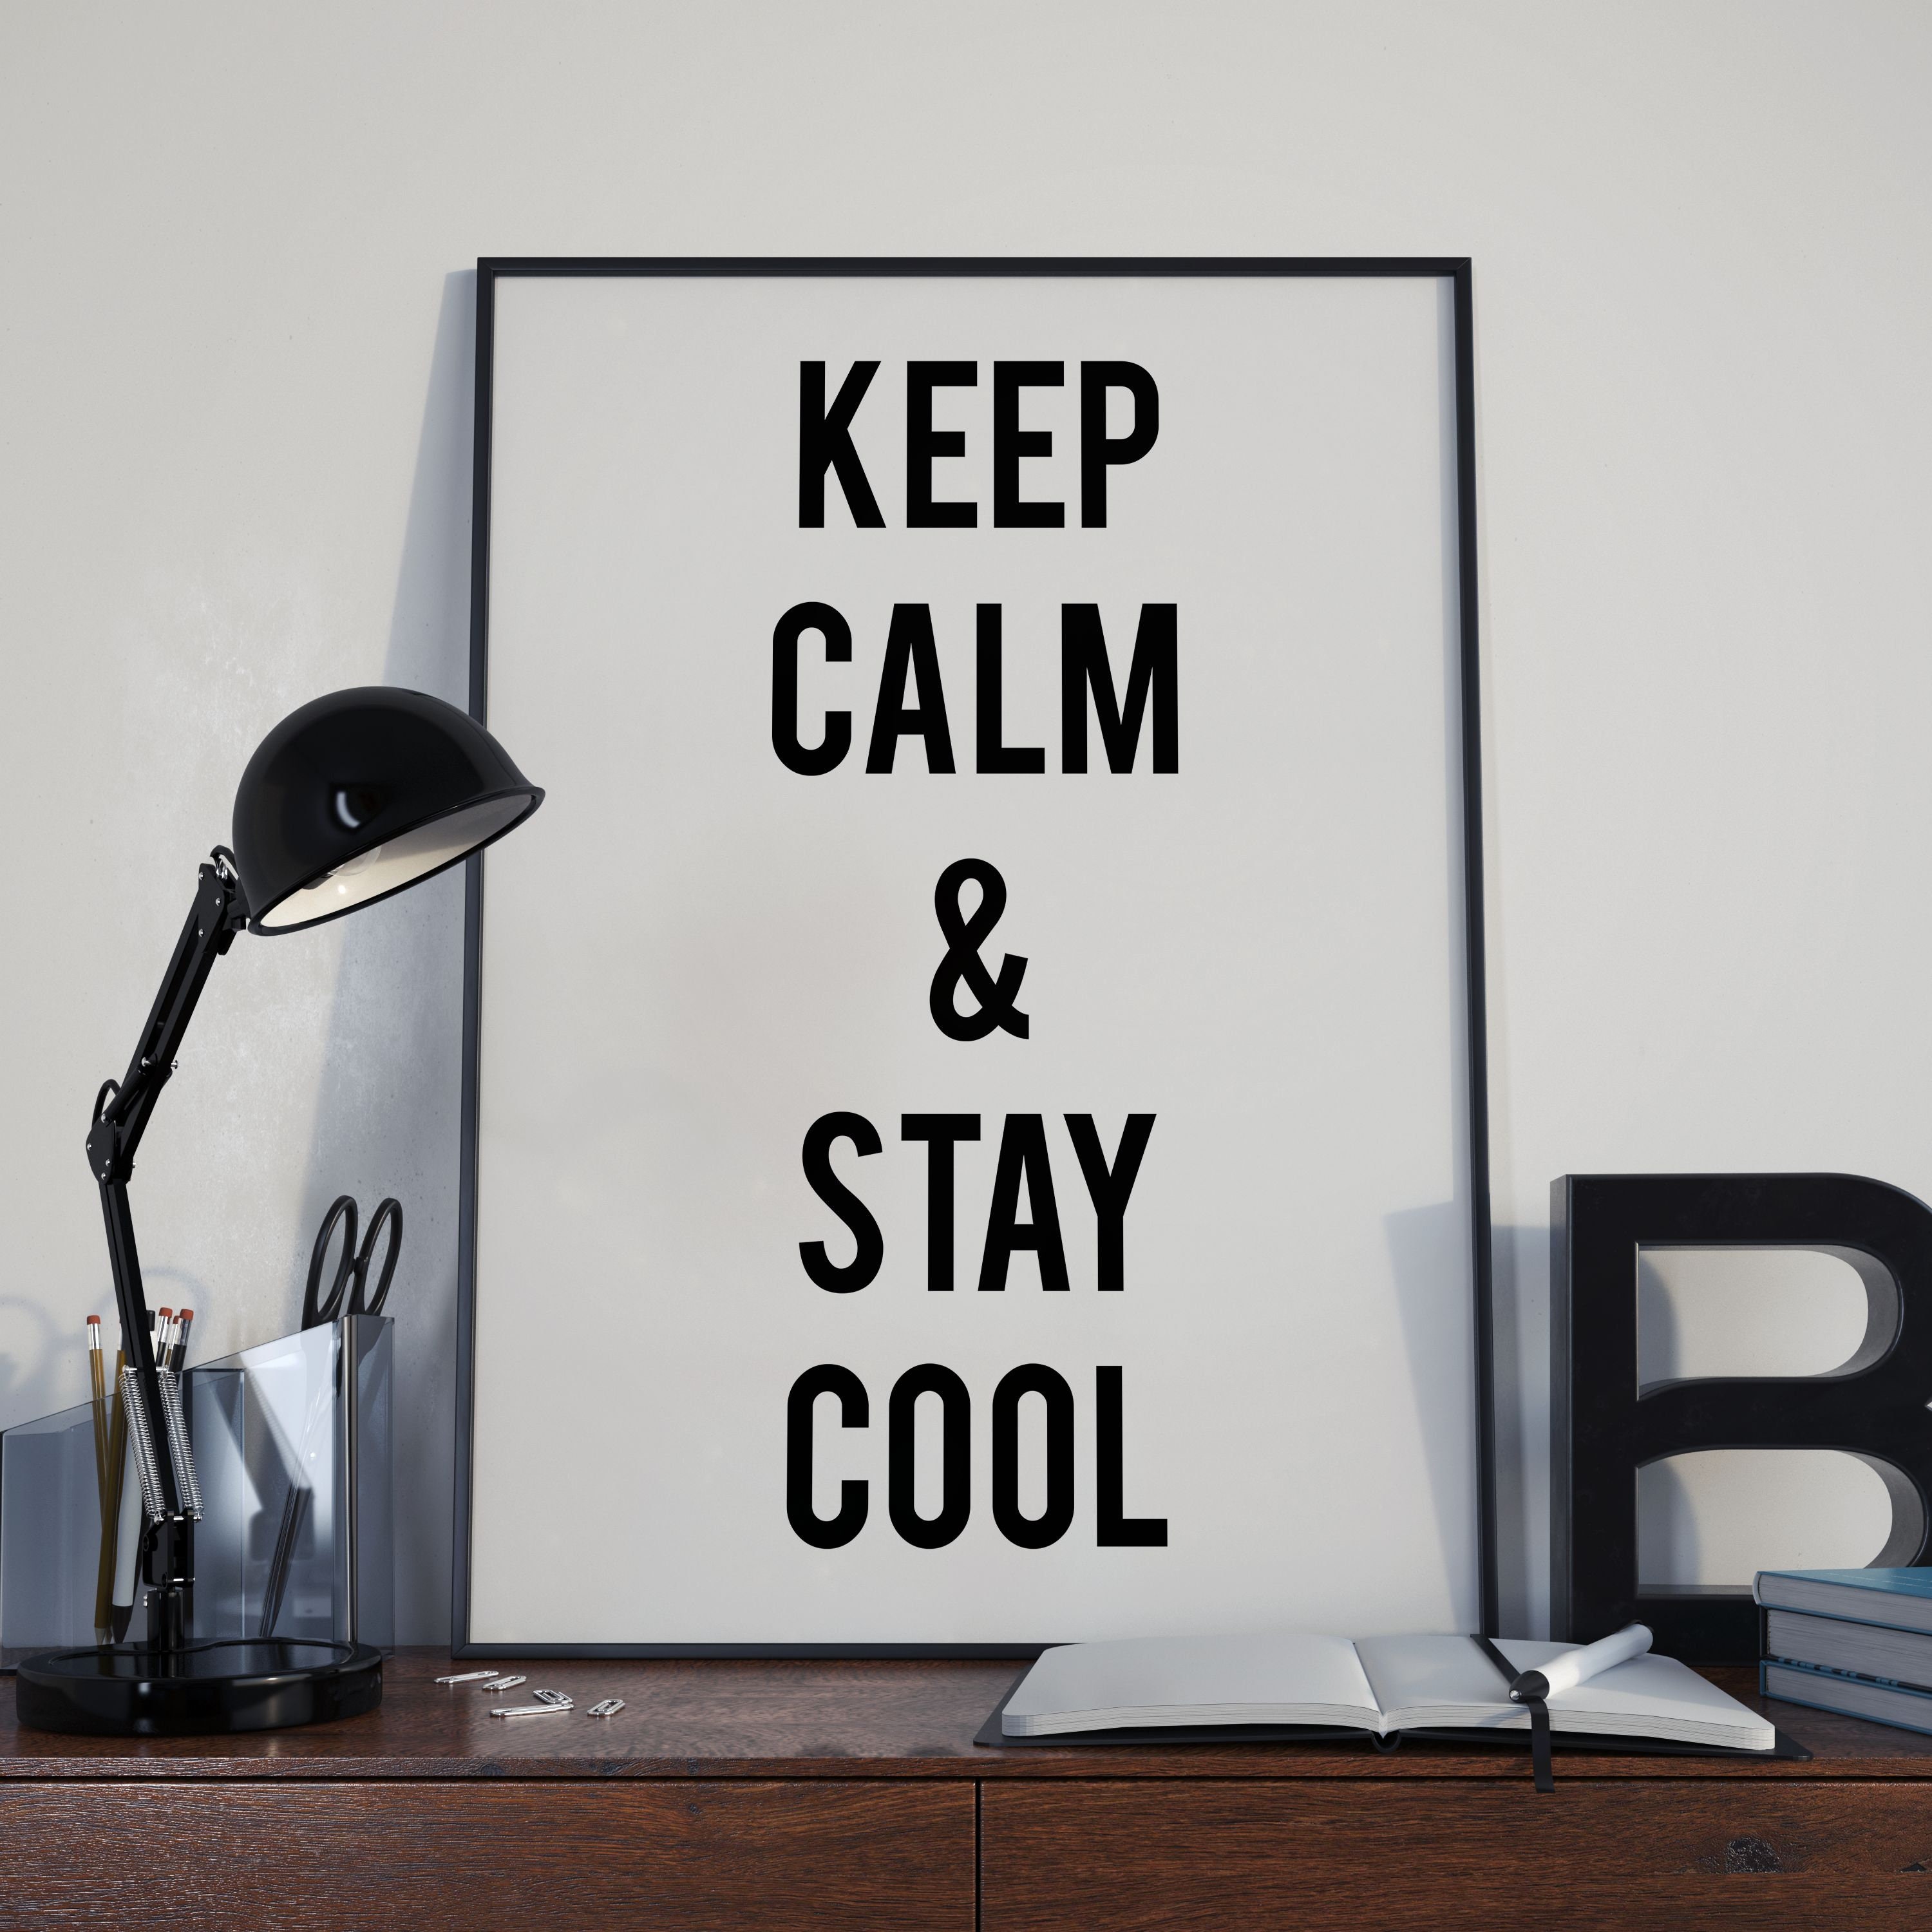 Keep Calm and Stay Cool, Motivational Quote Poster Print, Room Decor -   Canada